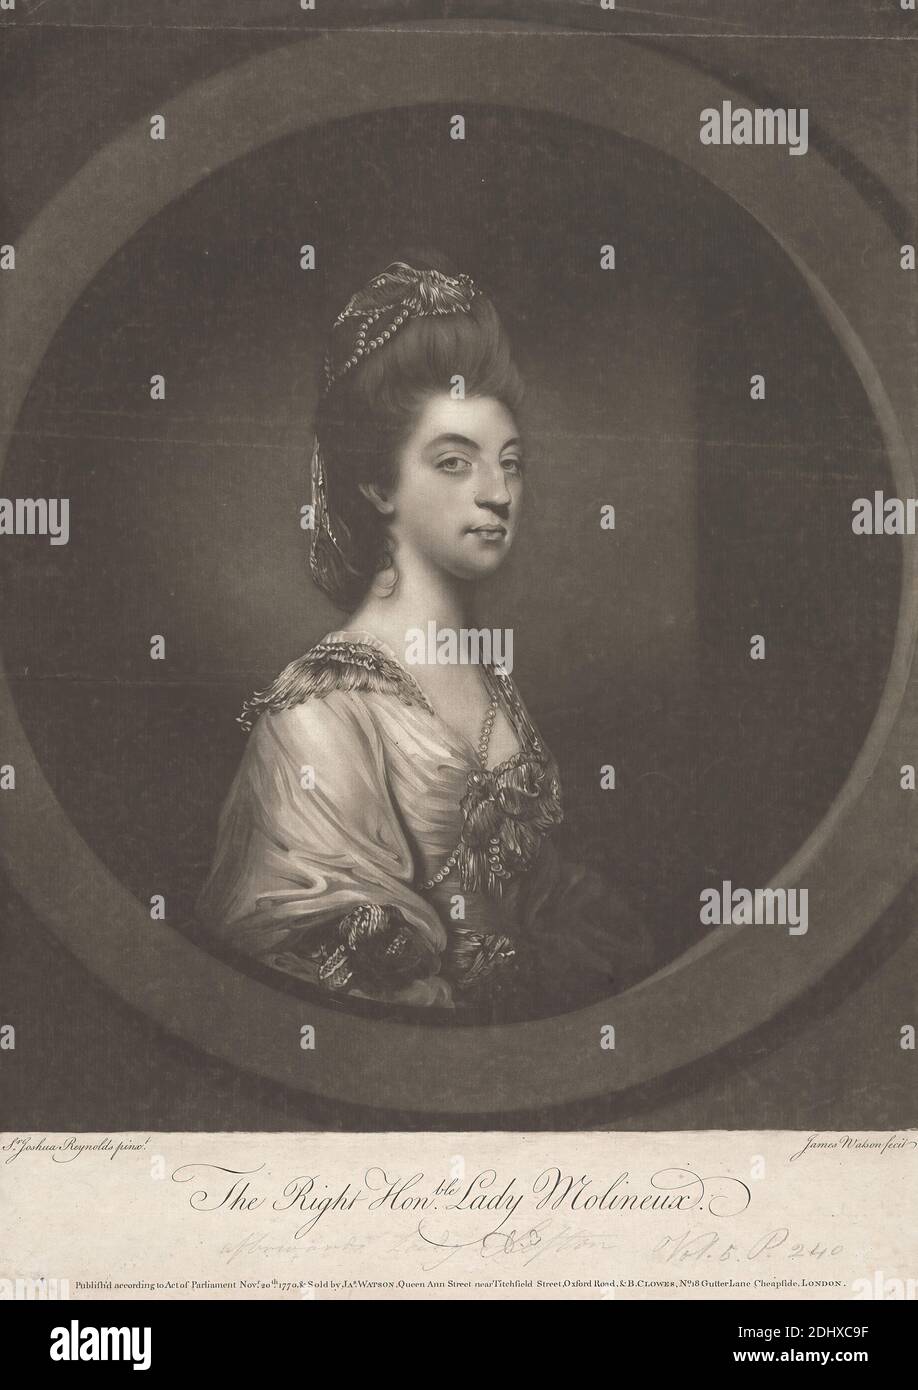 Isabella Molyneux (née Stanhope), Countess of Sefton, James Watson, 1740–1790, British, after Sir Joshua Reynolds RA, 1723–1792, British, 1770, Mezzotint on medium, moderately textured, blued white, laid paper, Sheet: 15 3/8 × 10 15/16 inches (39.1 × 27.8 cm) and Image: 13 5/16 × 10 7/8 inches (33.8 × 27.6 cm Stock Photo